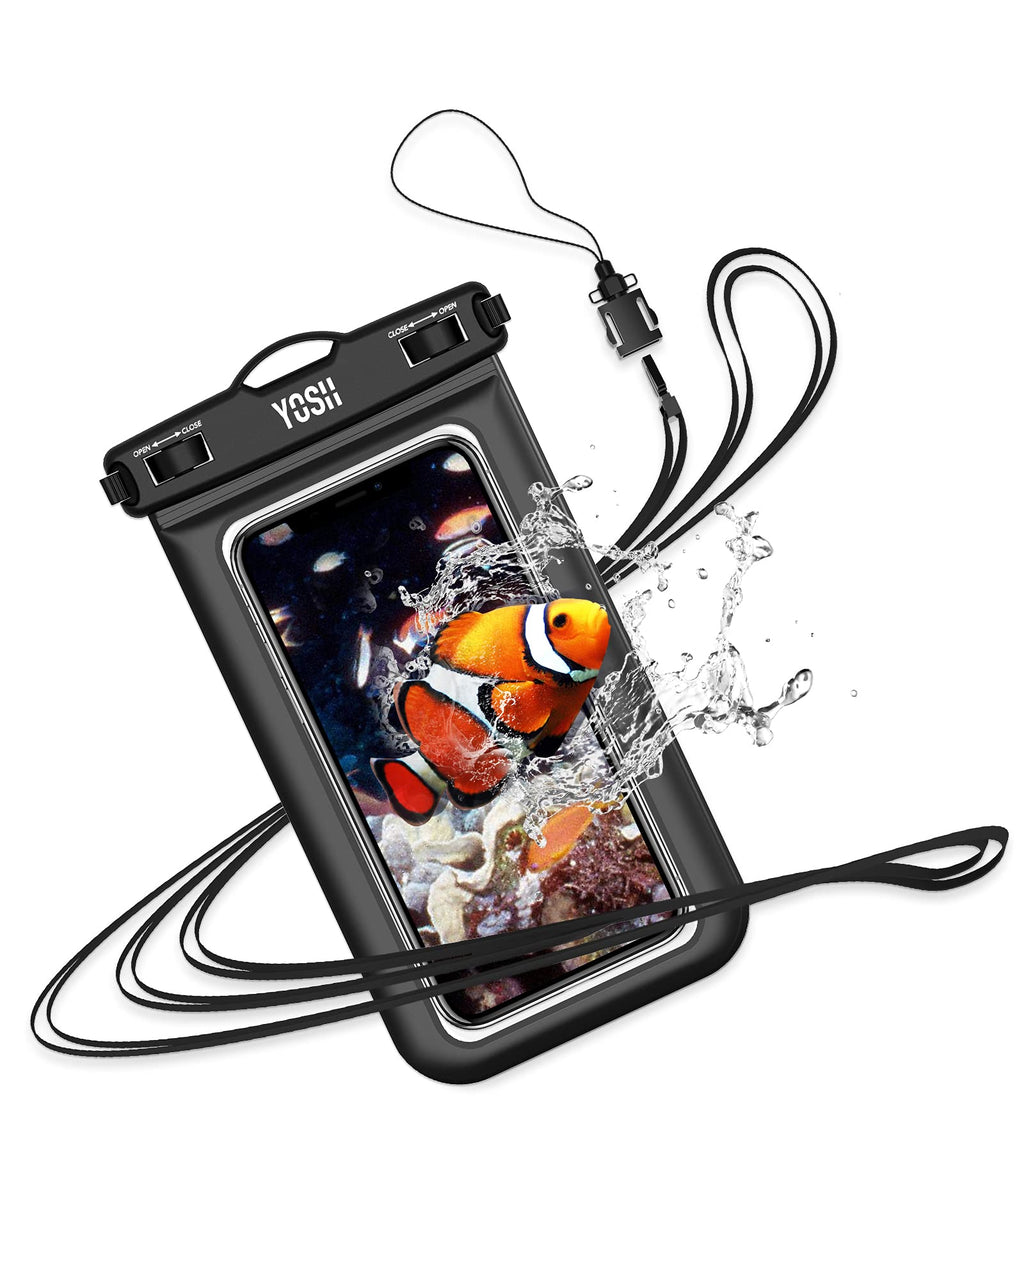 YOSH Waterproof Phone Case Universal Waterproof Phone Pouch IPX8 Dry Bag Compatible for iPhone 12 11 SE X 8 7 6 Galaxy S20 Pixel up to 6.8", for Beach Kayaking Bath Travel - Black - LeoForward Australia